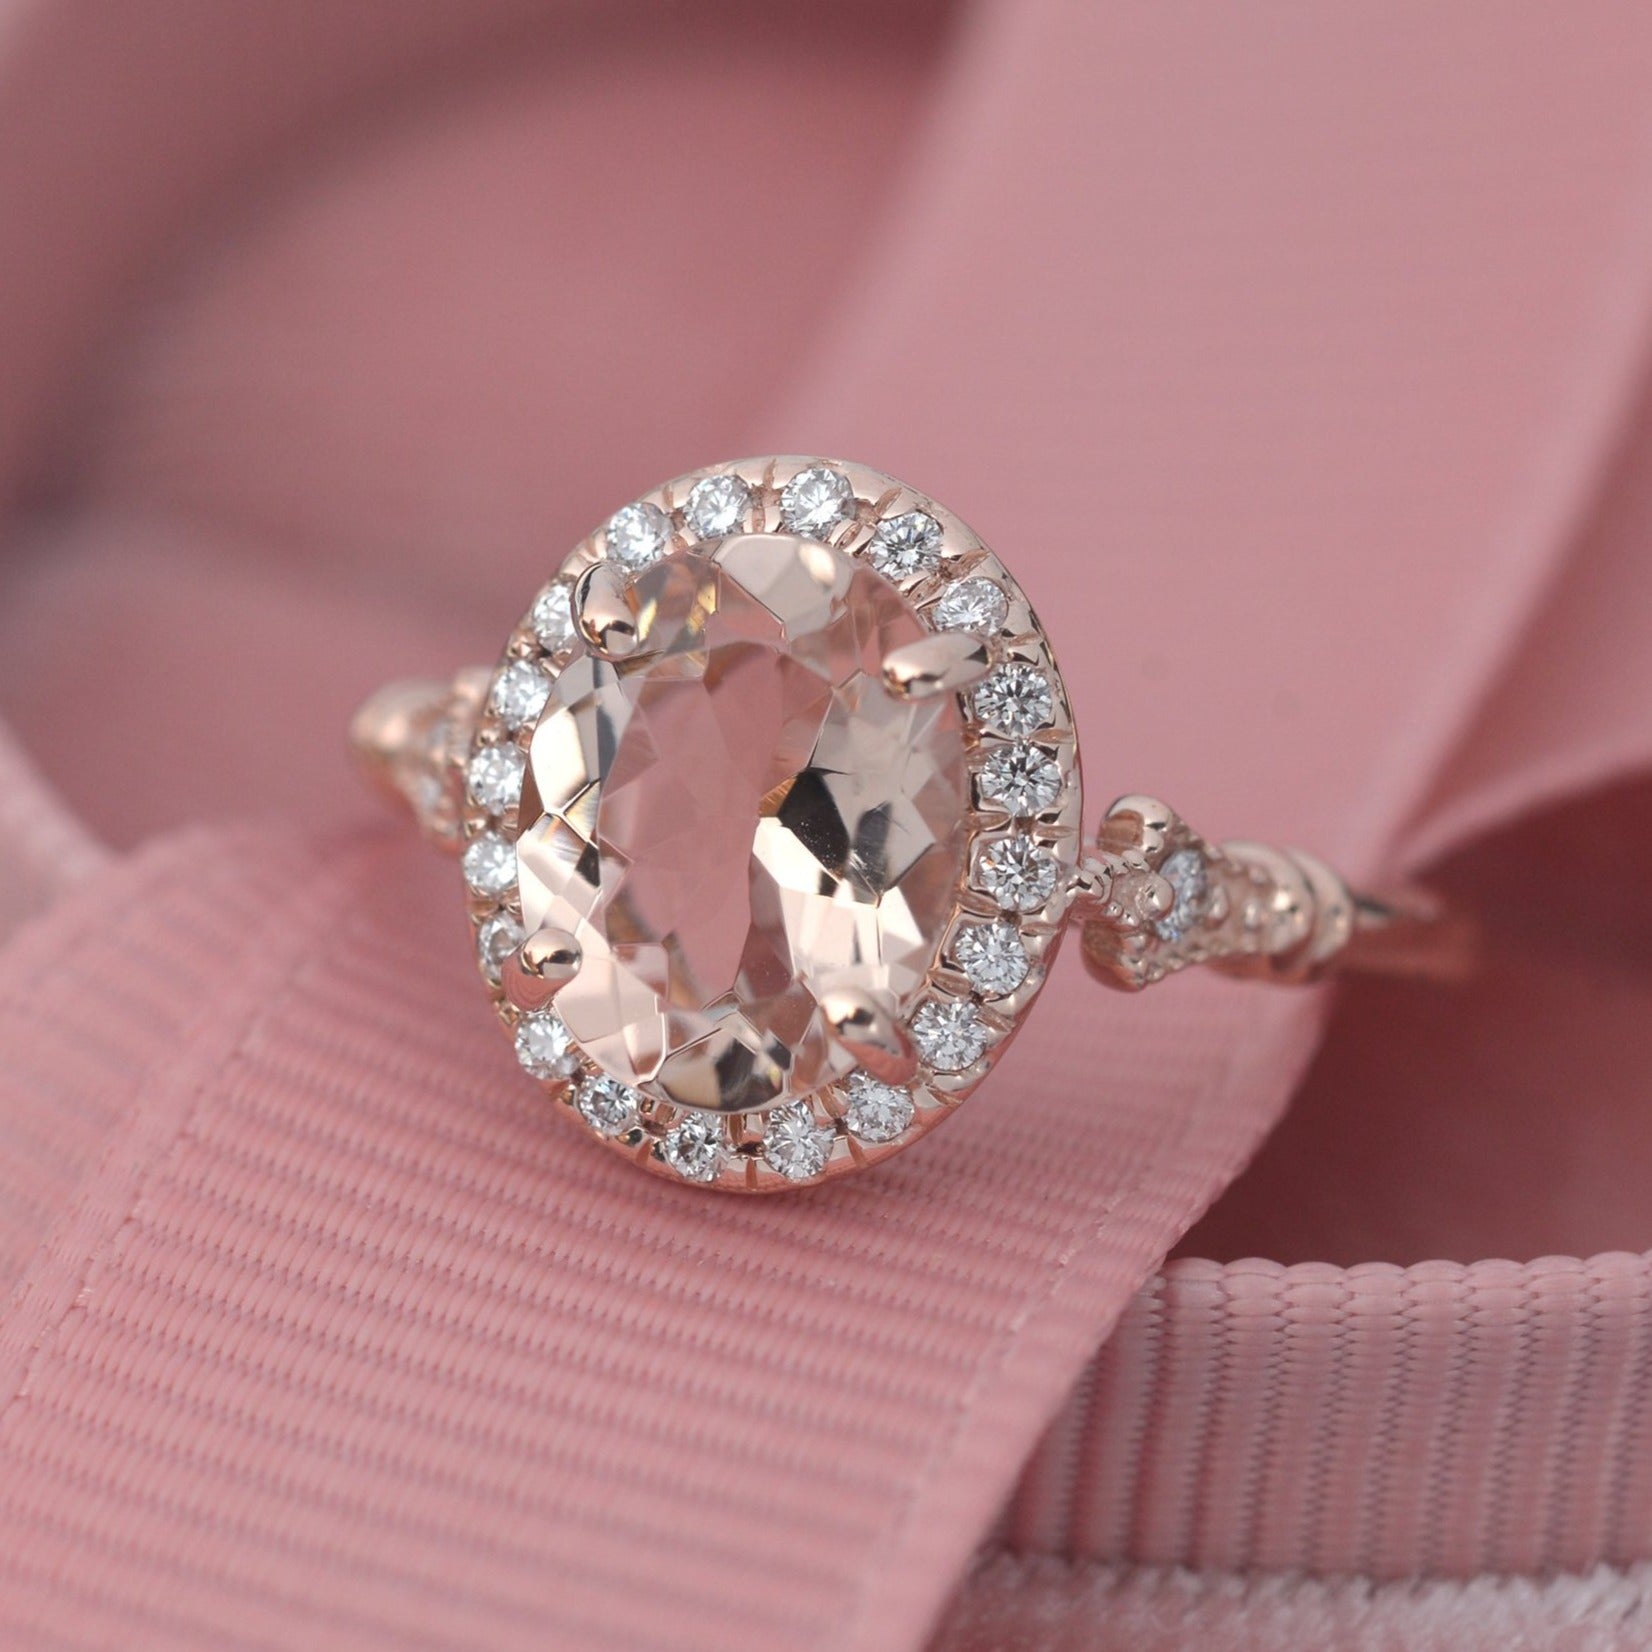 Gem Stone King 925 Sterling Silver Peach Nano Morganite Engagement Ring For  Women (3.82 Cttw, Emerald Cut 10X8MM, Available In Size 5, 6, 7, 8, 9) |  Amazon.com